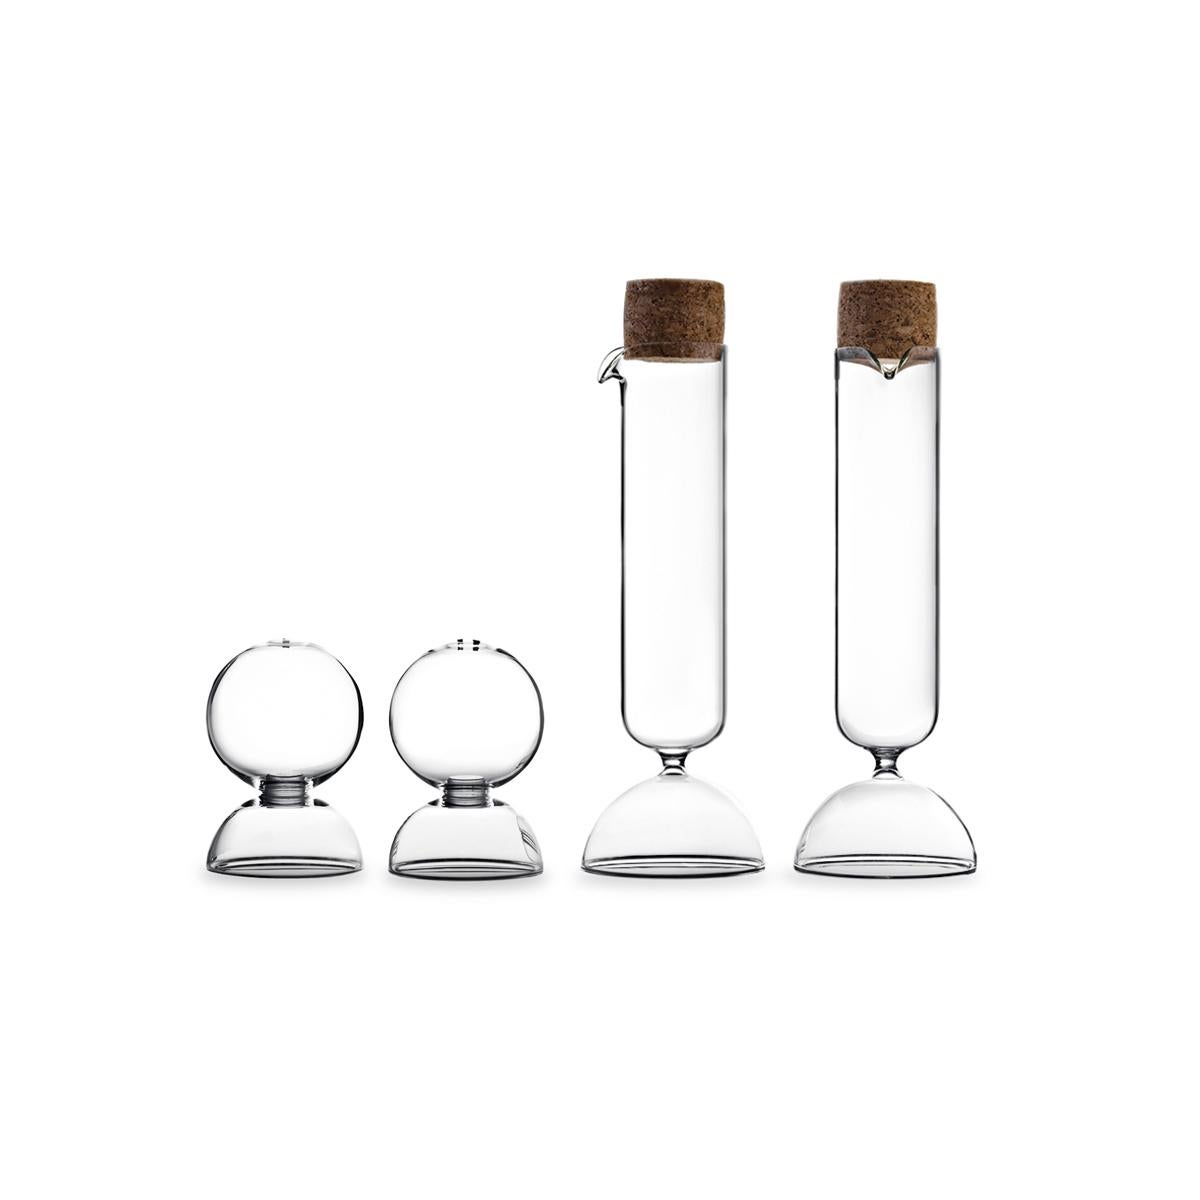 Bubble, designed by Gordon Guillaumier, is an oil and vinegar dispenser set made in transparent blown glass with cork cap.